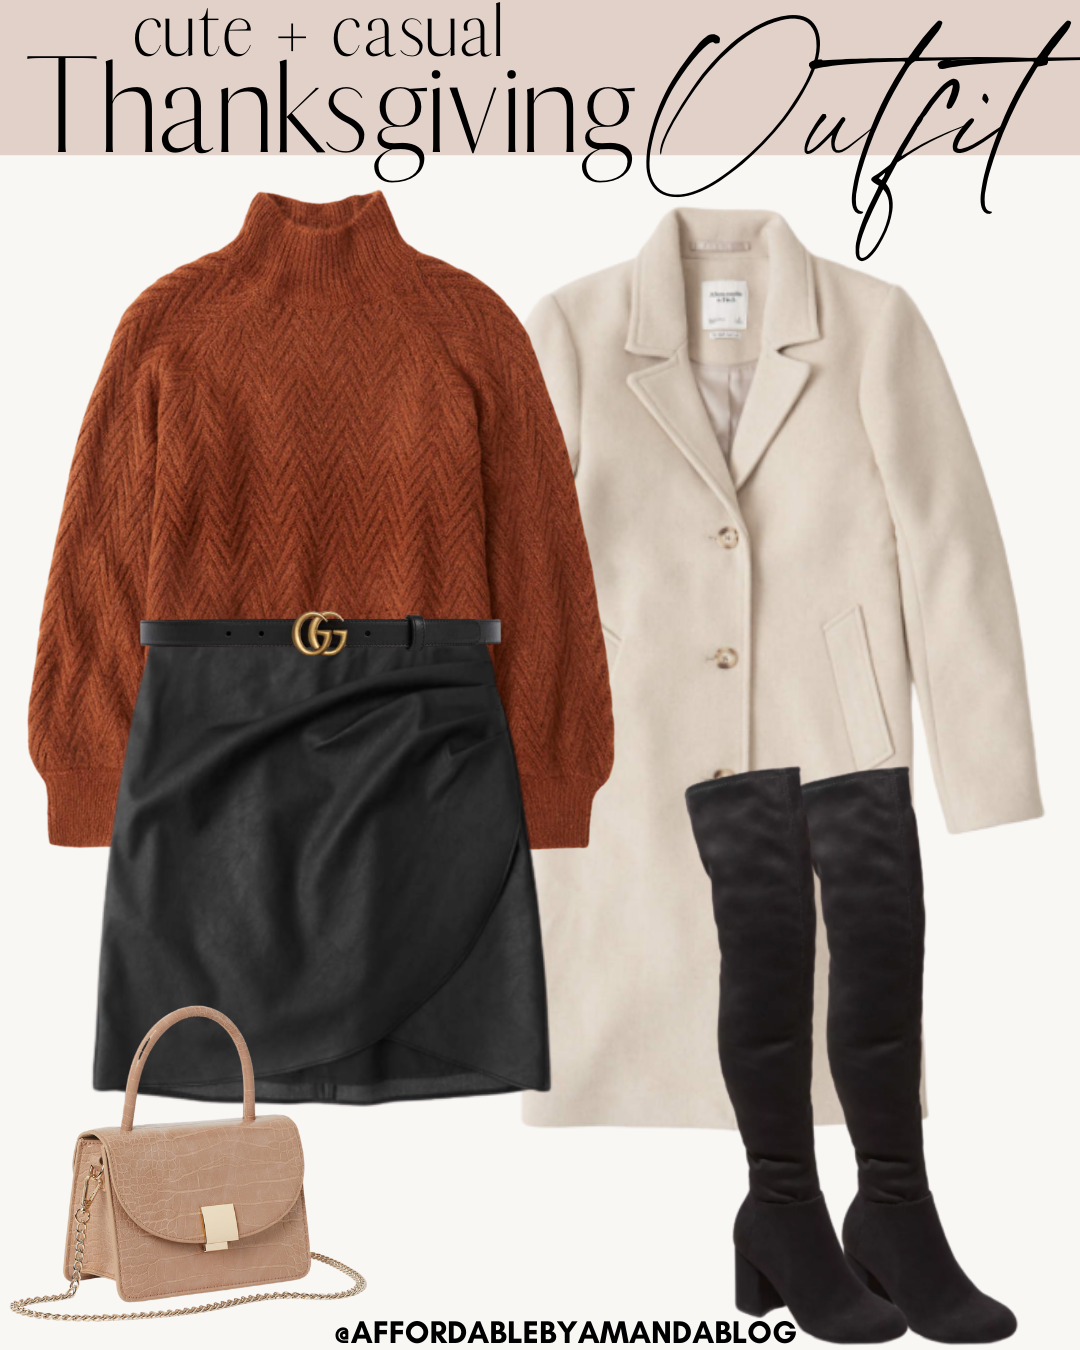 Cute Thanksgiving Outfit Ideas | Thanksgiving Outfit Ideas 2020 | Thanksgiving Outfits 2020 | Women's Outfits for Thanksgiving